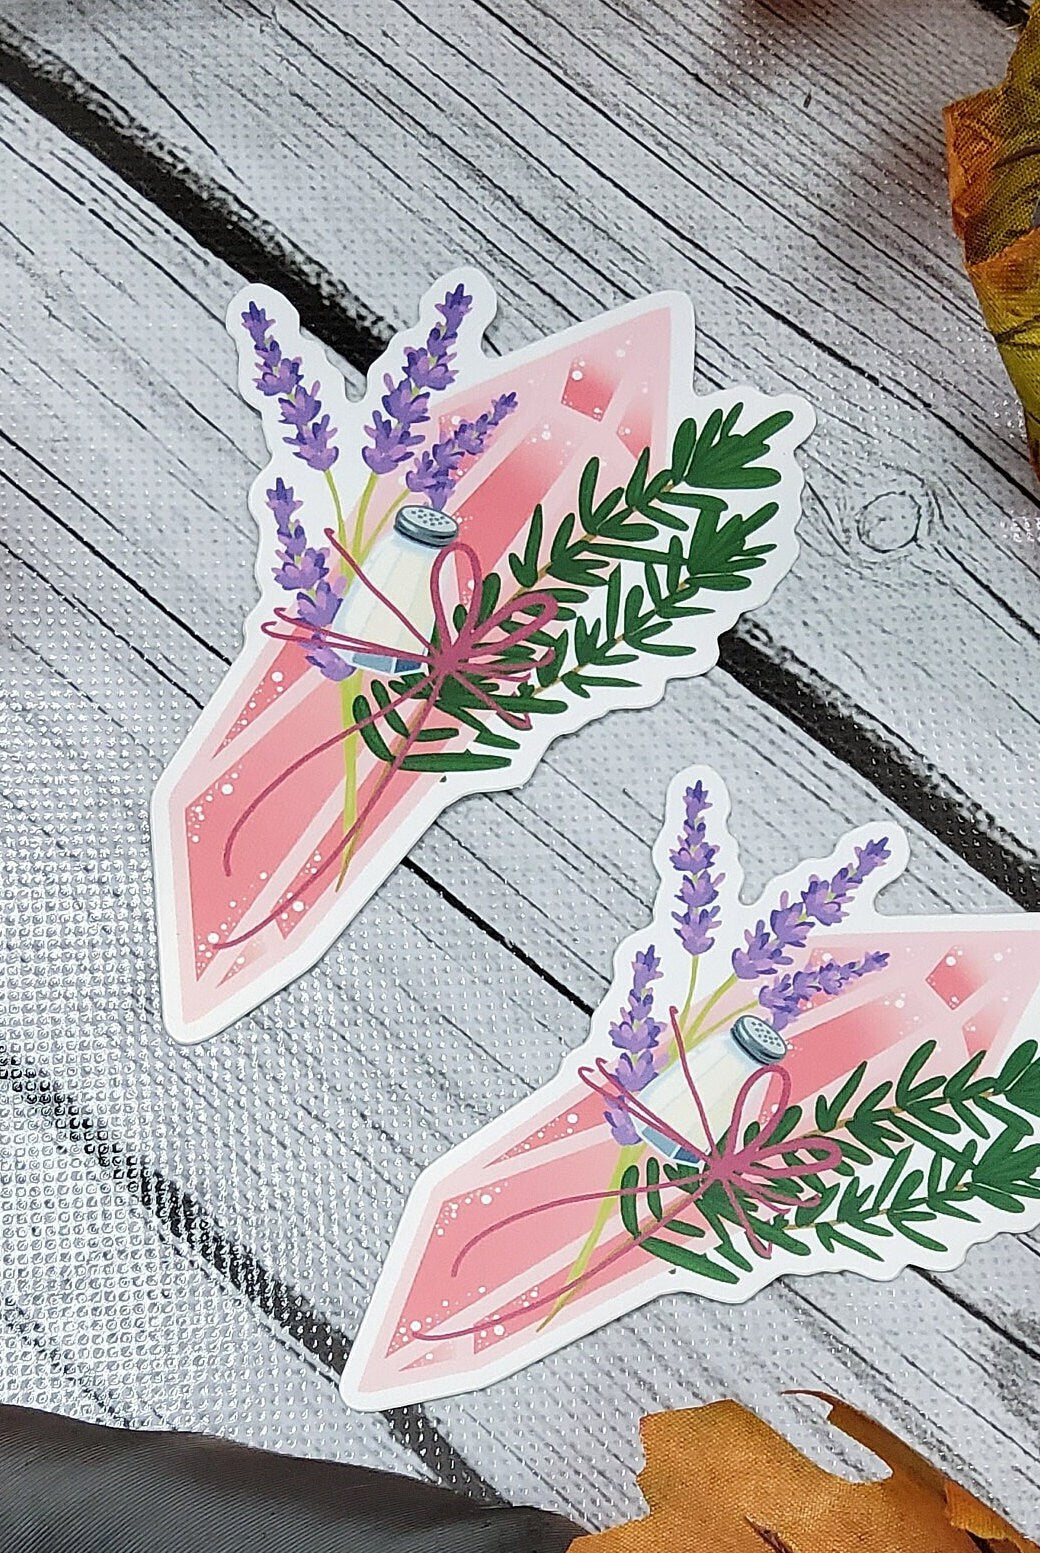 MATTE STICKER: Rosemary and Lavender Crystal Magic , Pink Aesthetic Crystal Sticker , Crystal Sticker , Magic Crystal Sticker , Crystals